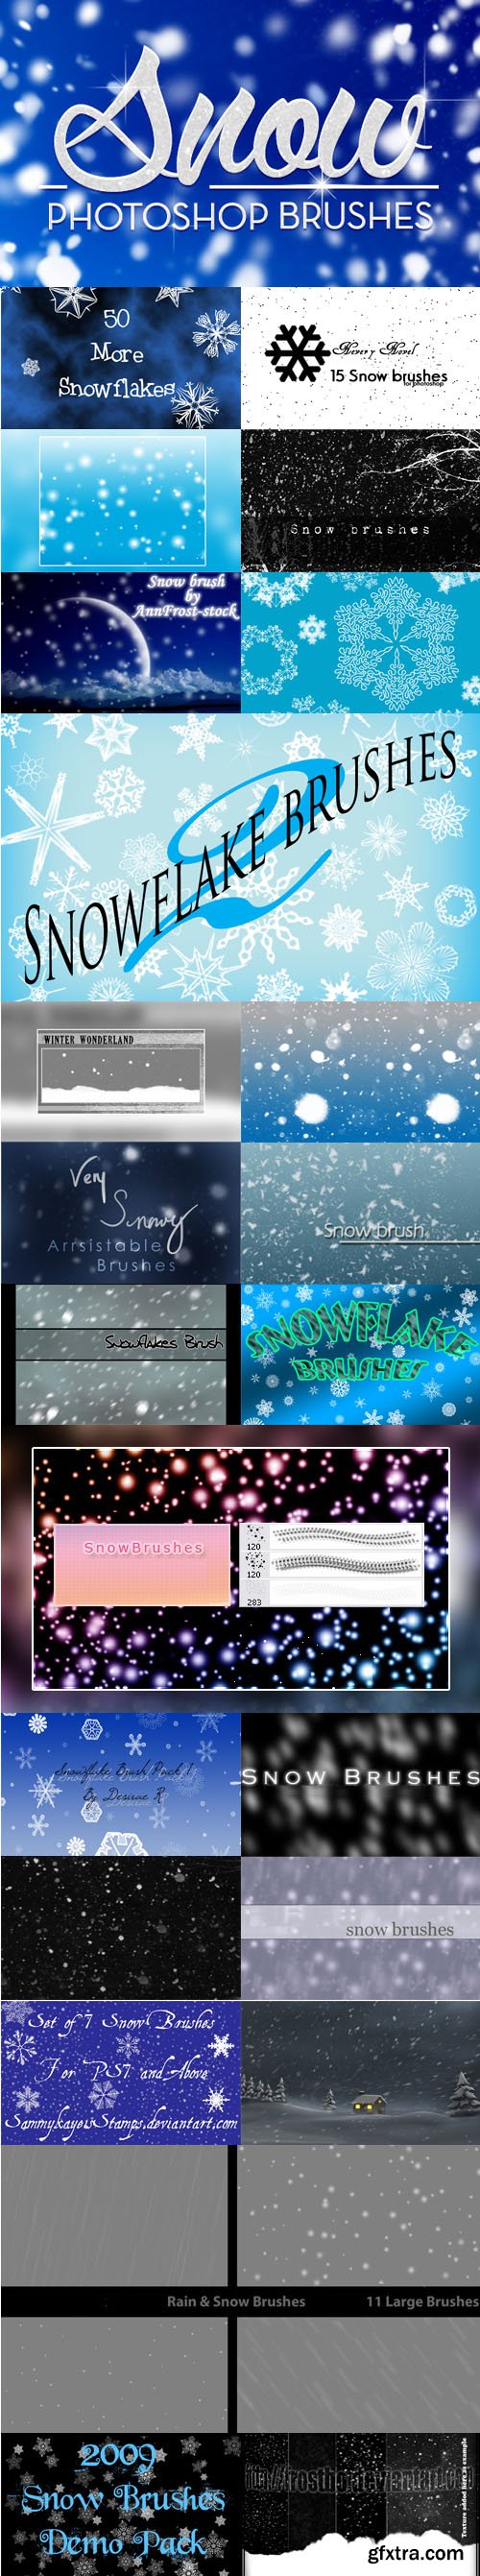 25 Snow Brushes for Photoshop